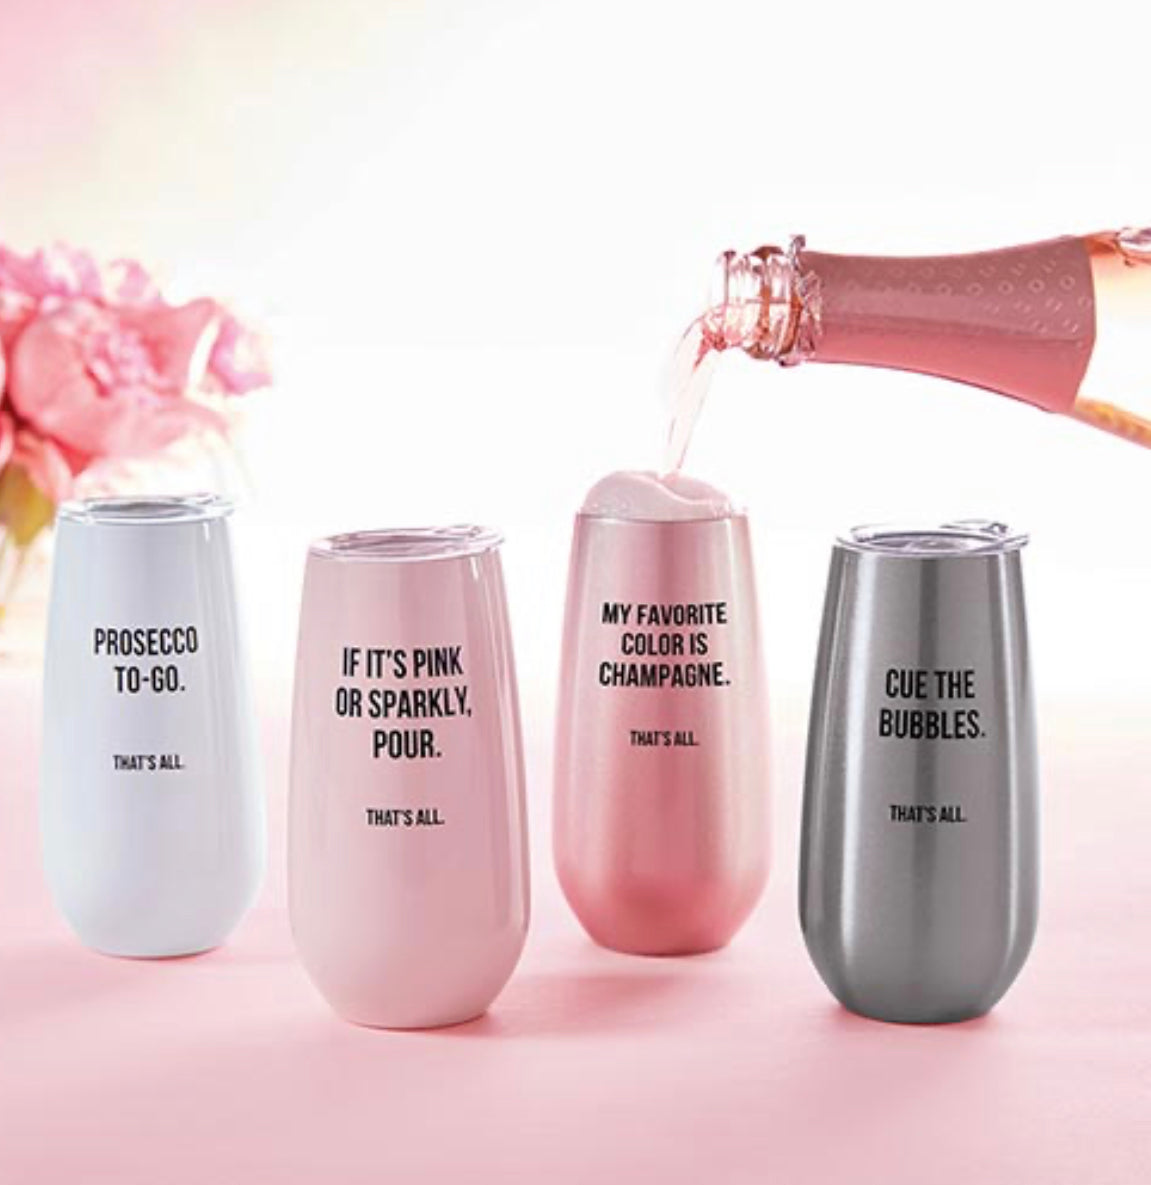 That's All® Champagne Tumbler - Cue the Bubbles